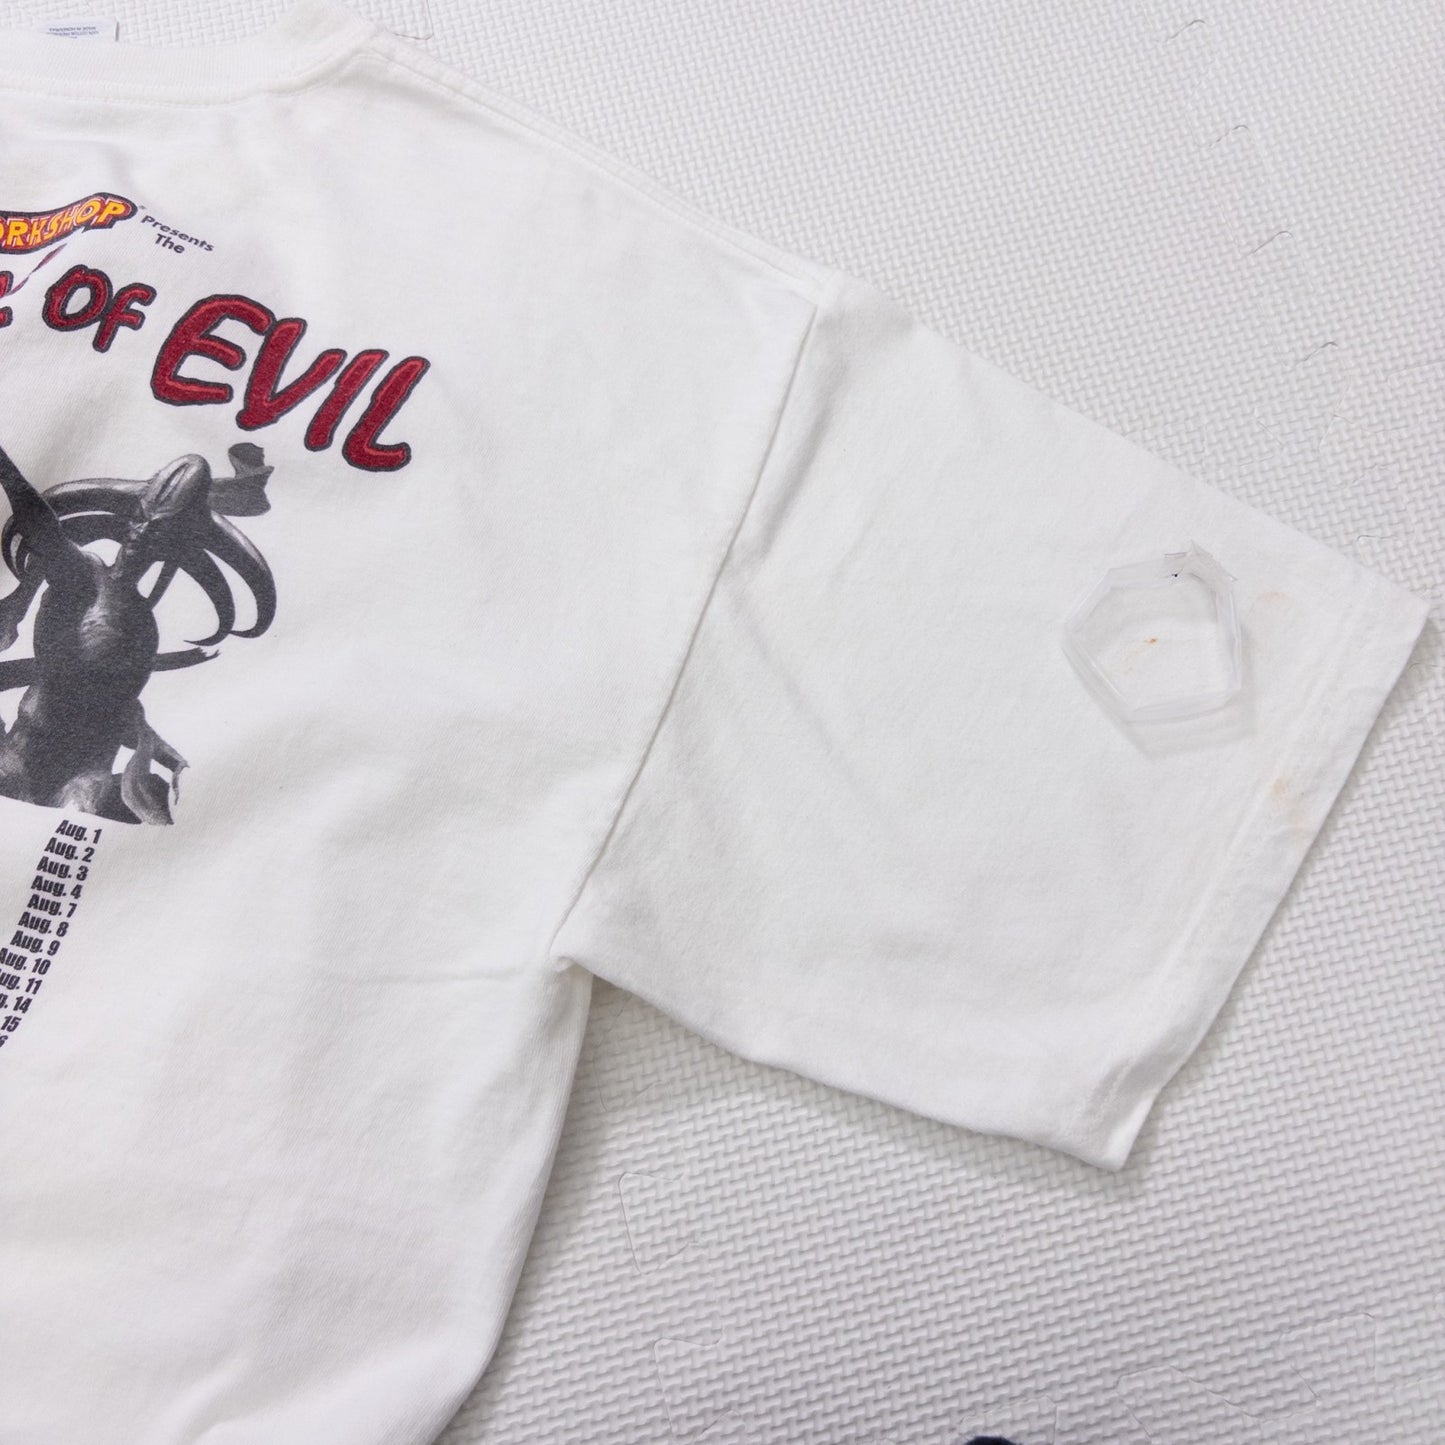 00s ”EPITOME OF EVIL” XL